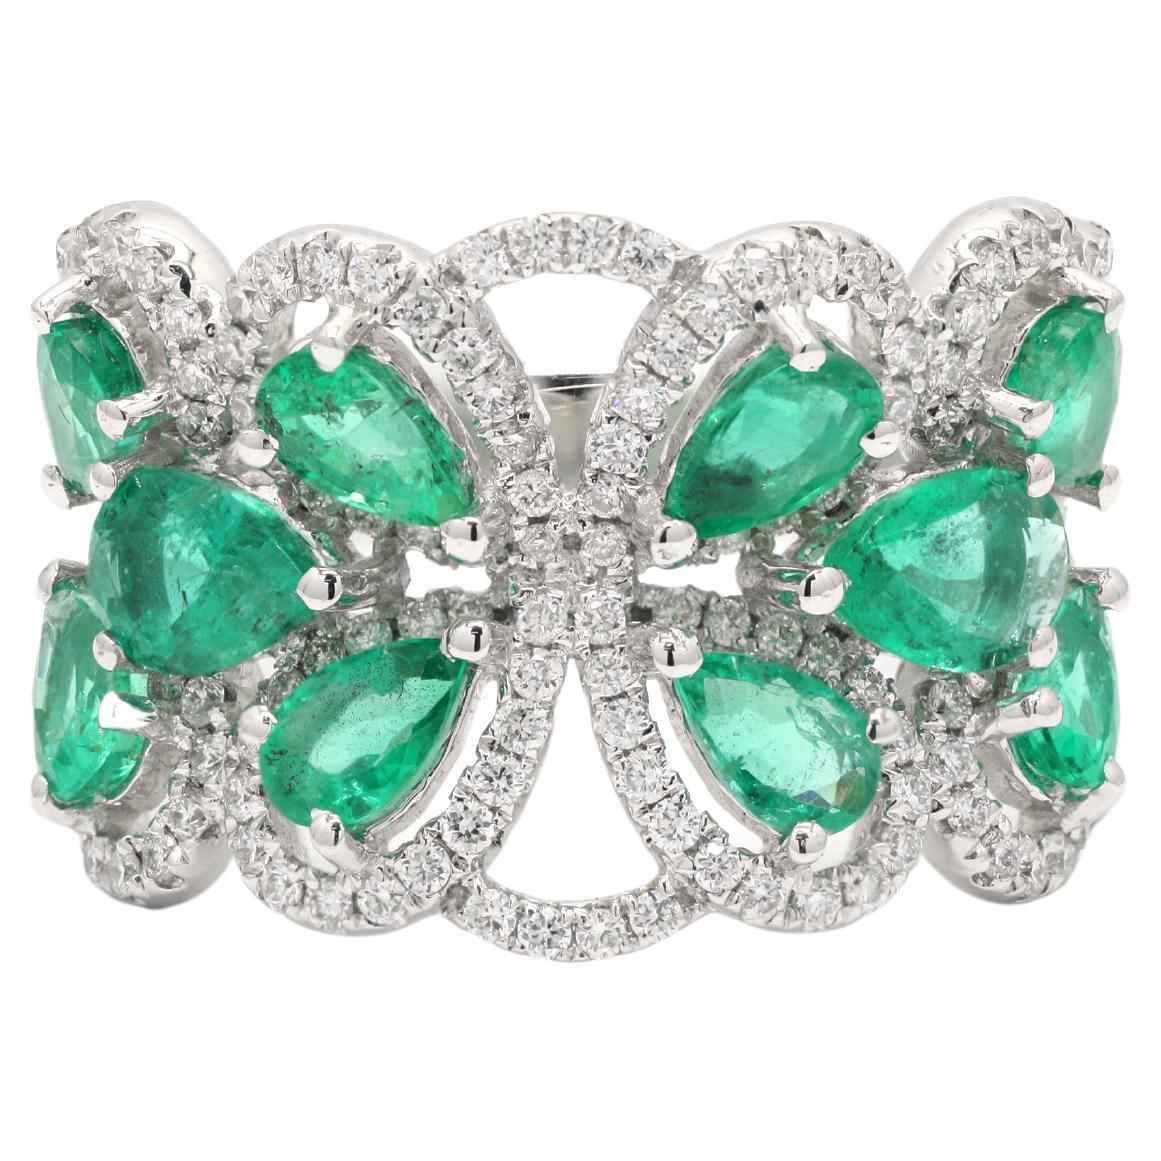 For Sale:  Bridal 14k White Gold Diamond and Emerald Ring